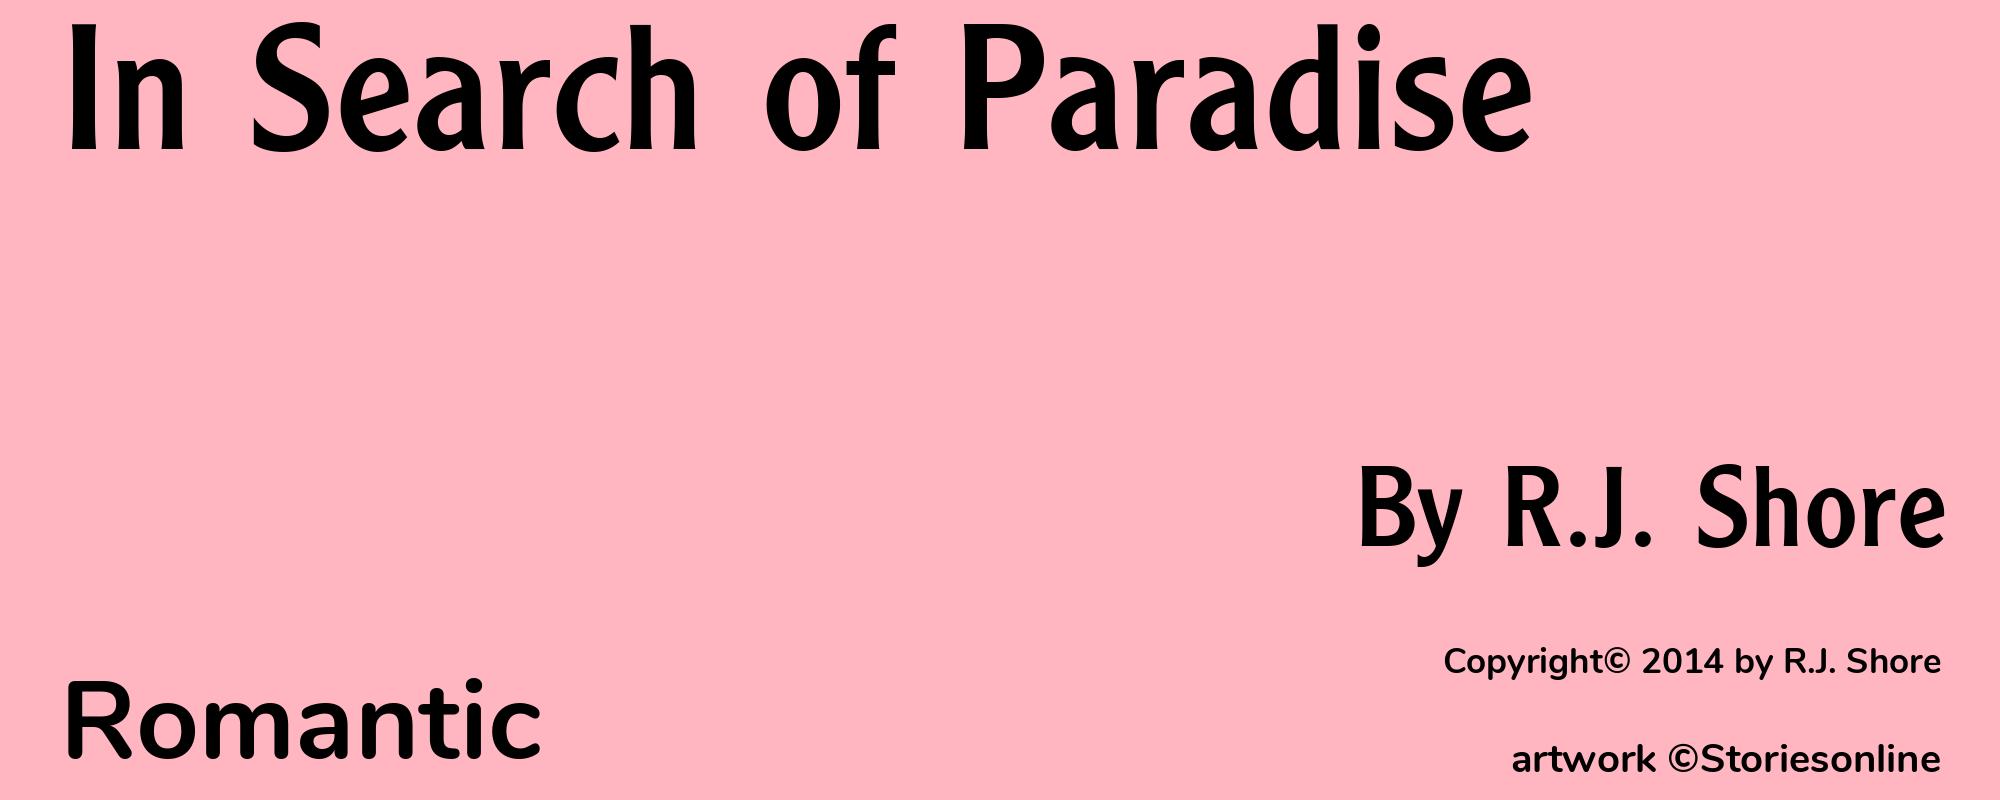 In Search of Paradise - Cover